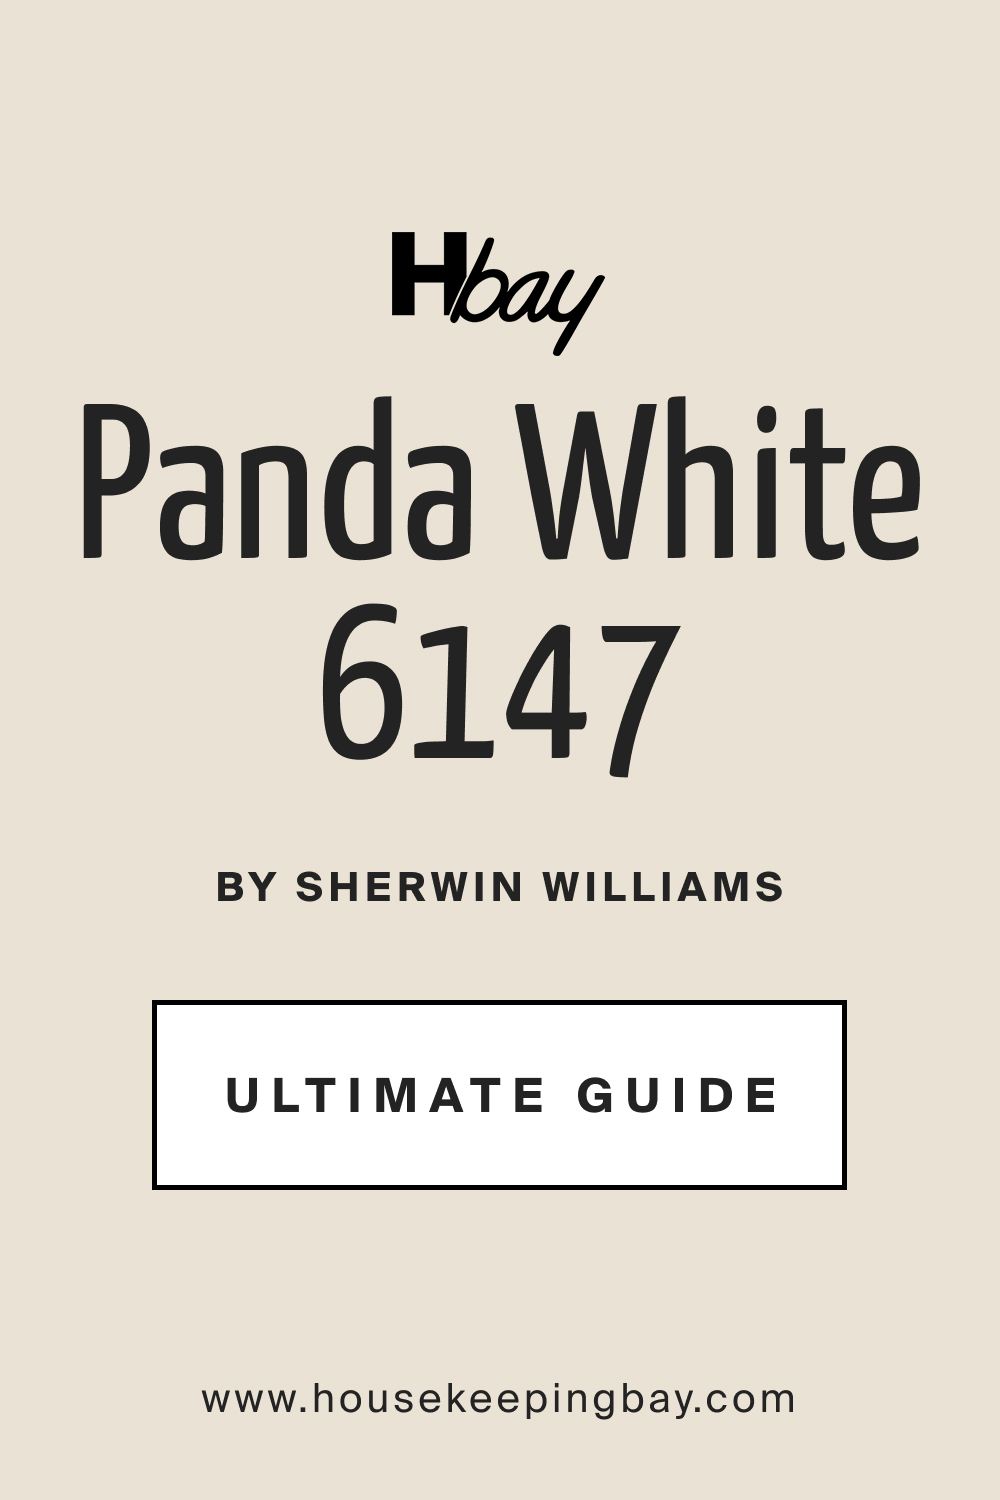 SW 6147 Panda White by Sherwin Williams Ultimate Guide